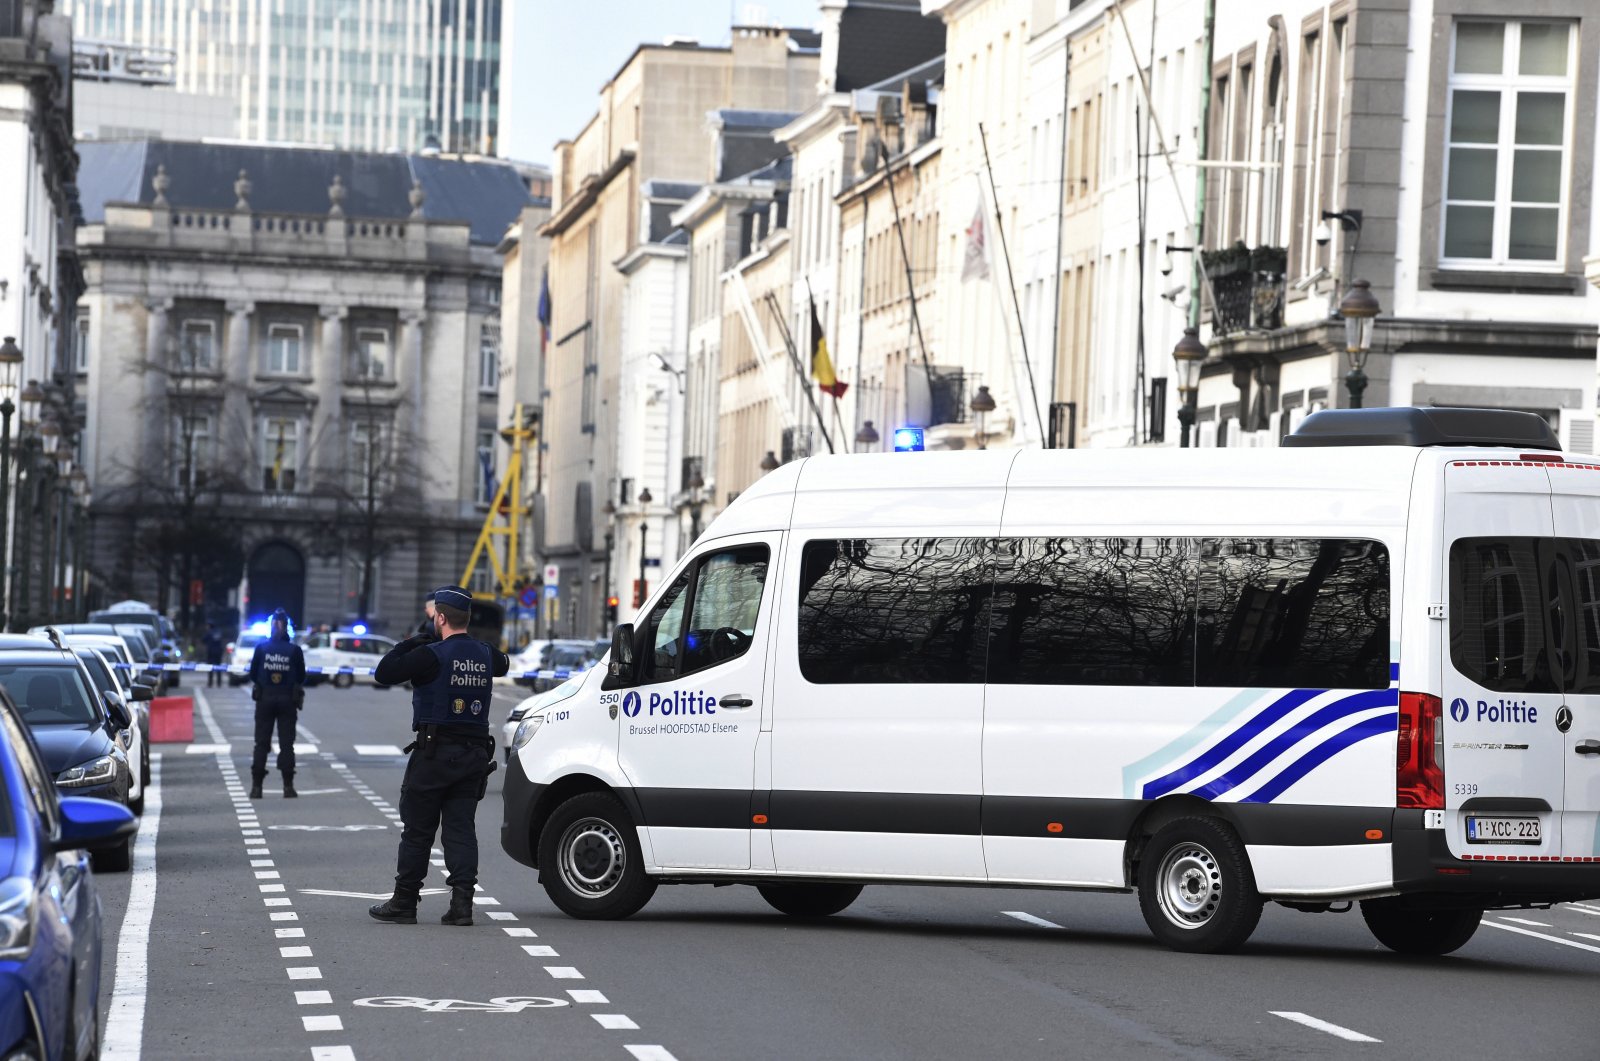 Belgian police has a street closed due to a suspicious car in front of 16 Rue de la Loi, the residence of Belgium's Prime Minister, during a National Security Council meeting at the premises in Brussels, Belgium, 17 March 2020. (EPA Photo)